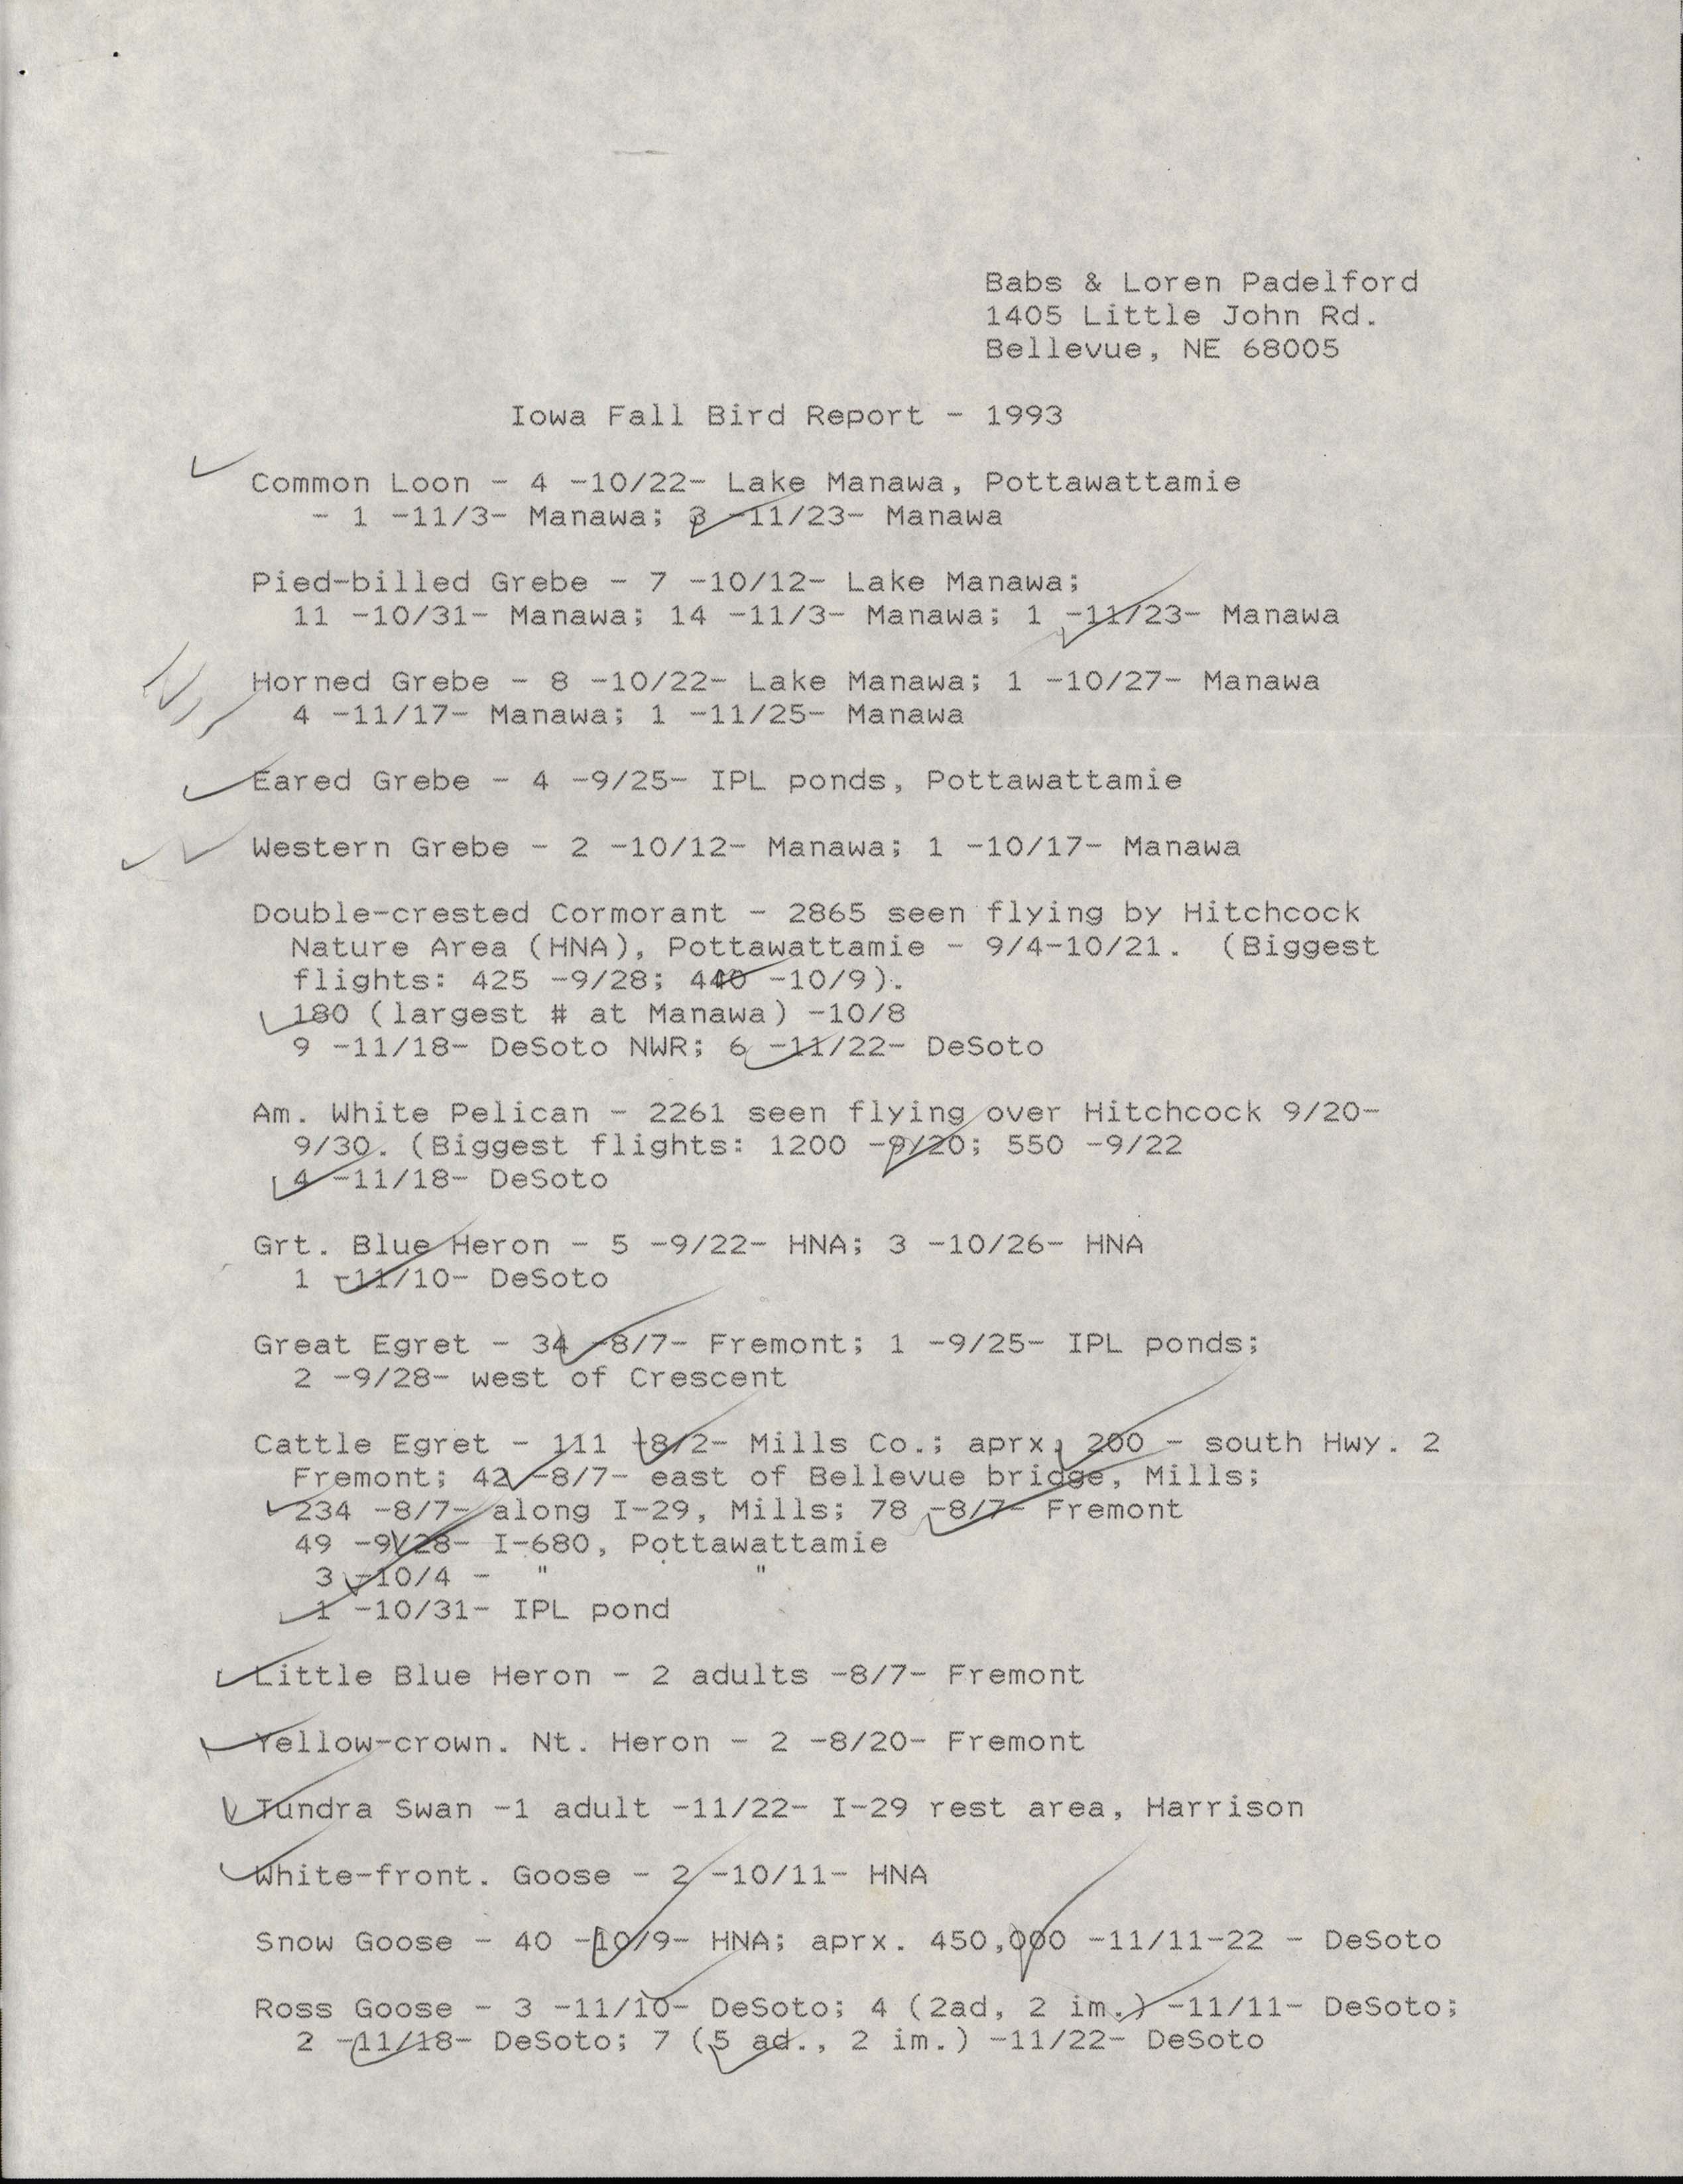 Field notes contributed by Babs Padelford and Loren Padelford, fall 1993